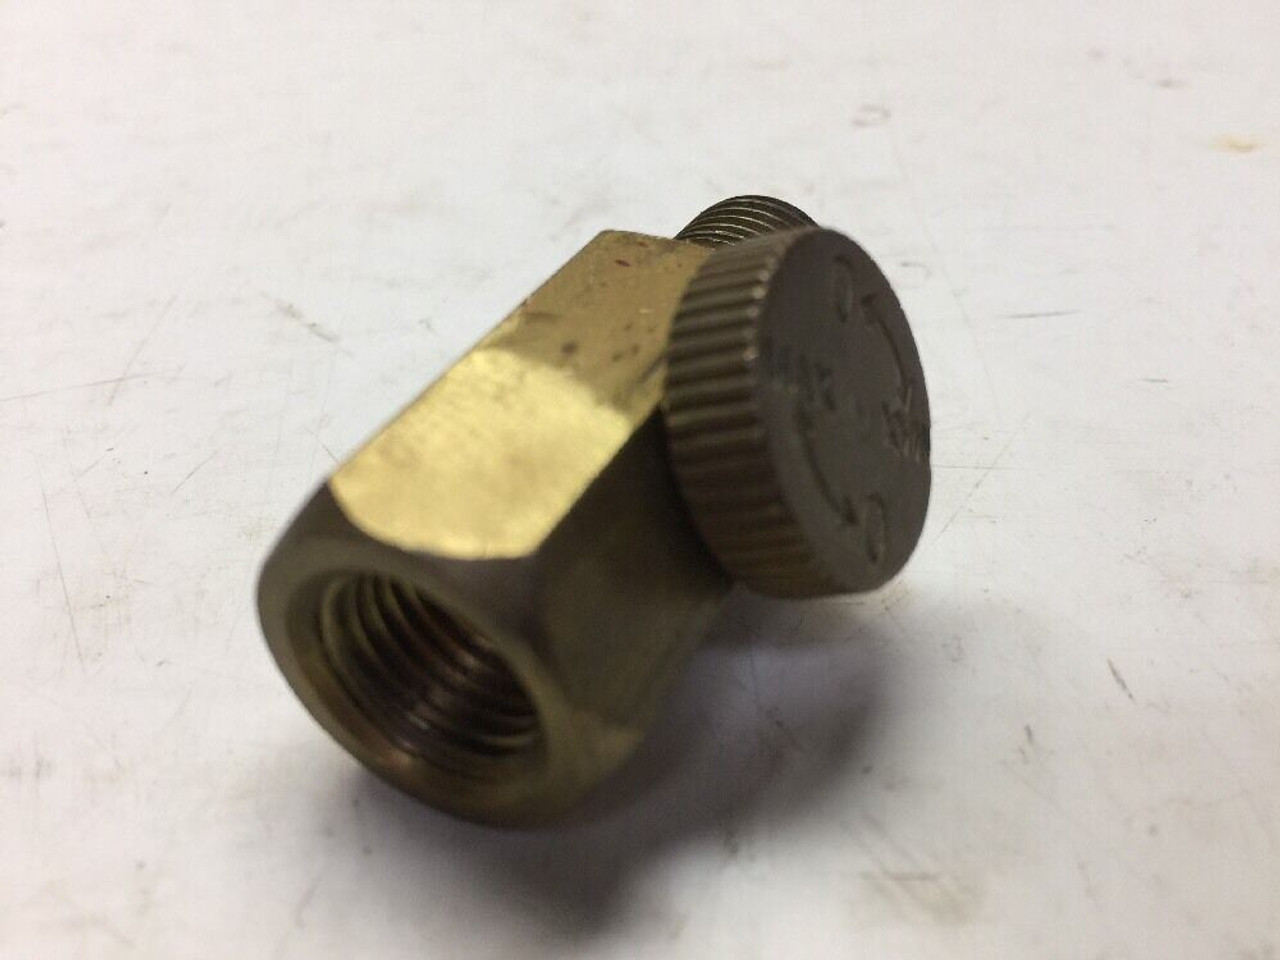 Pipe Connector Control Flow Valve Brass 1 7/8" Overall Length